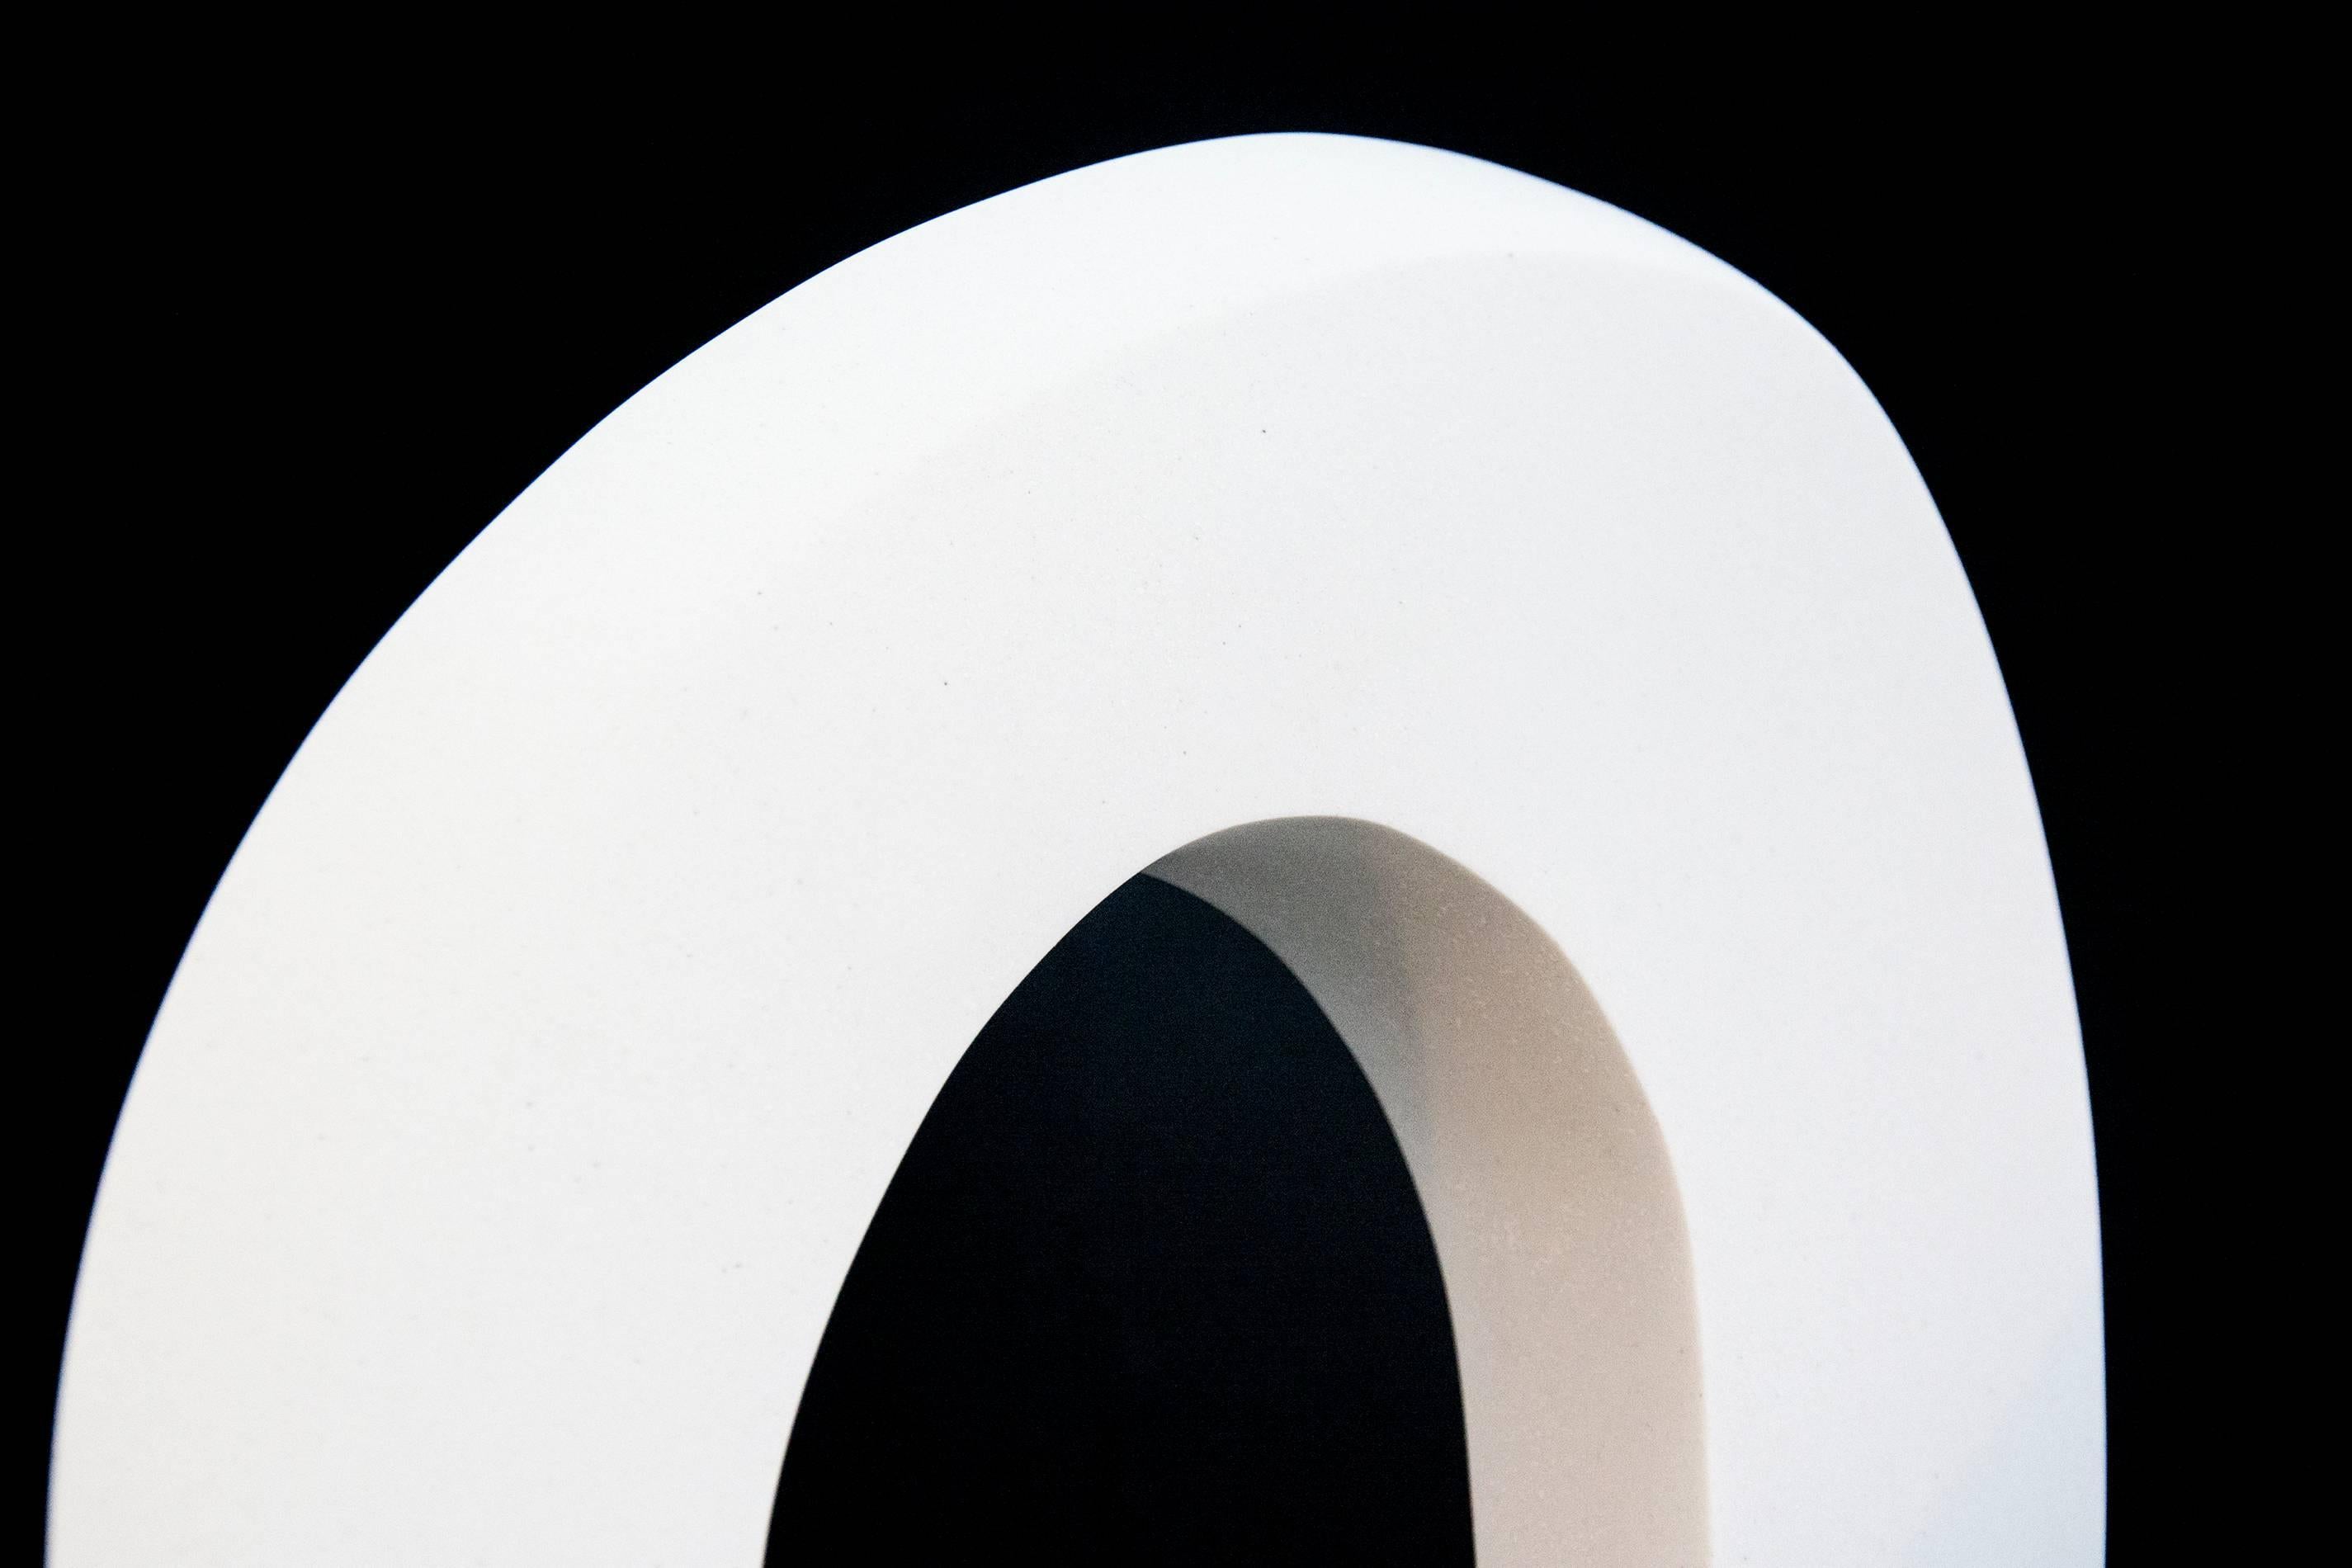 Pirouette White 5/50 - polished, abstract, engineered white marble sculpture - Abstract Sculpture by Jeremy Guy